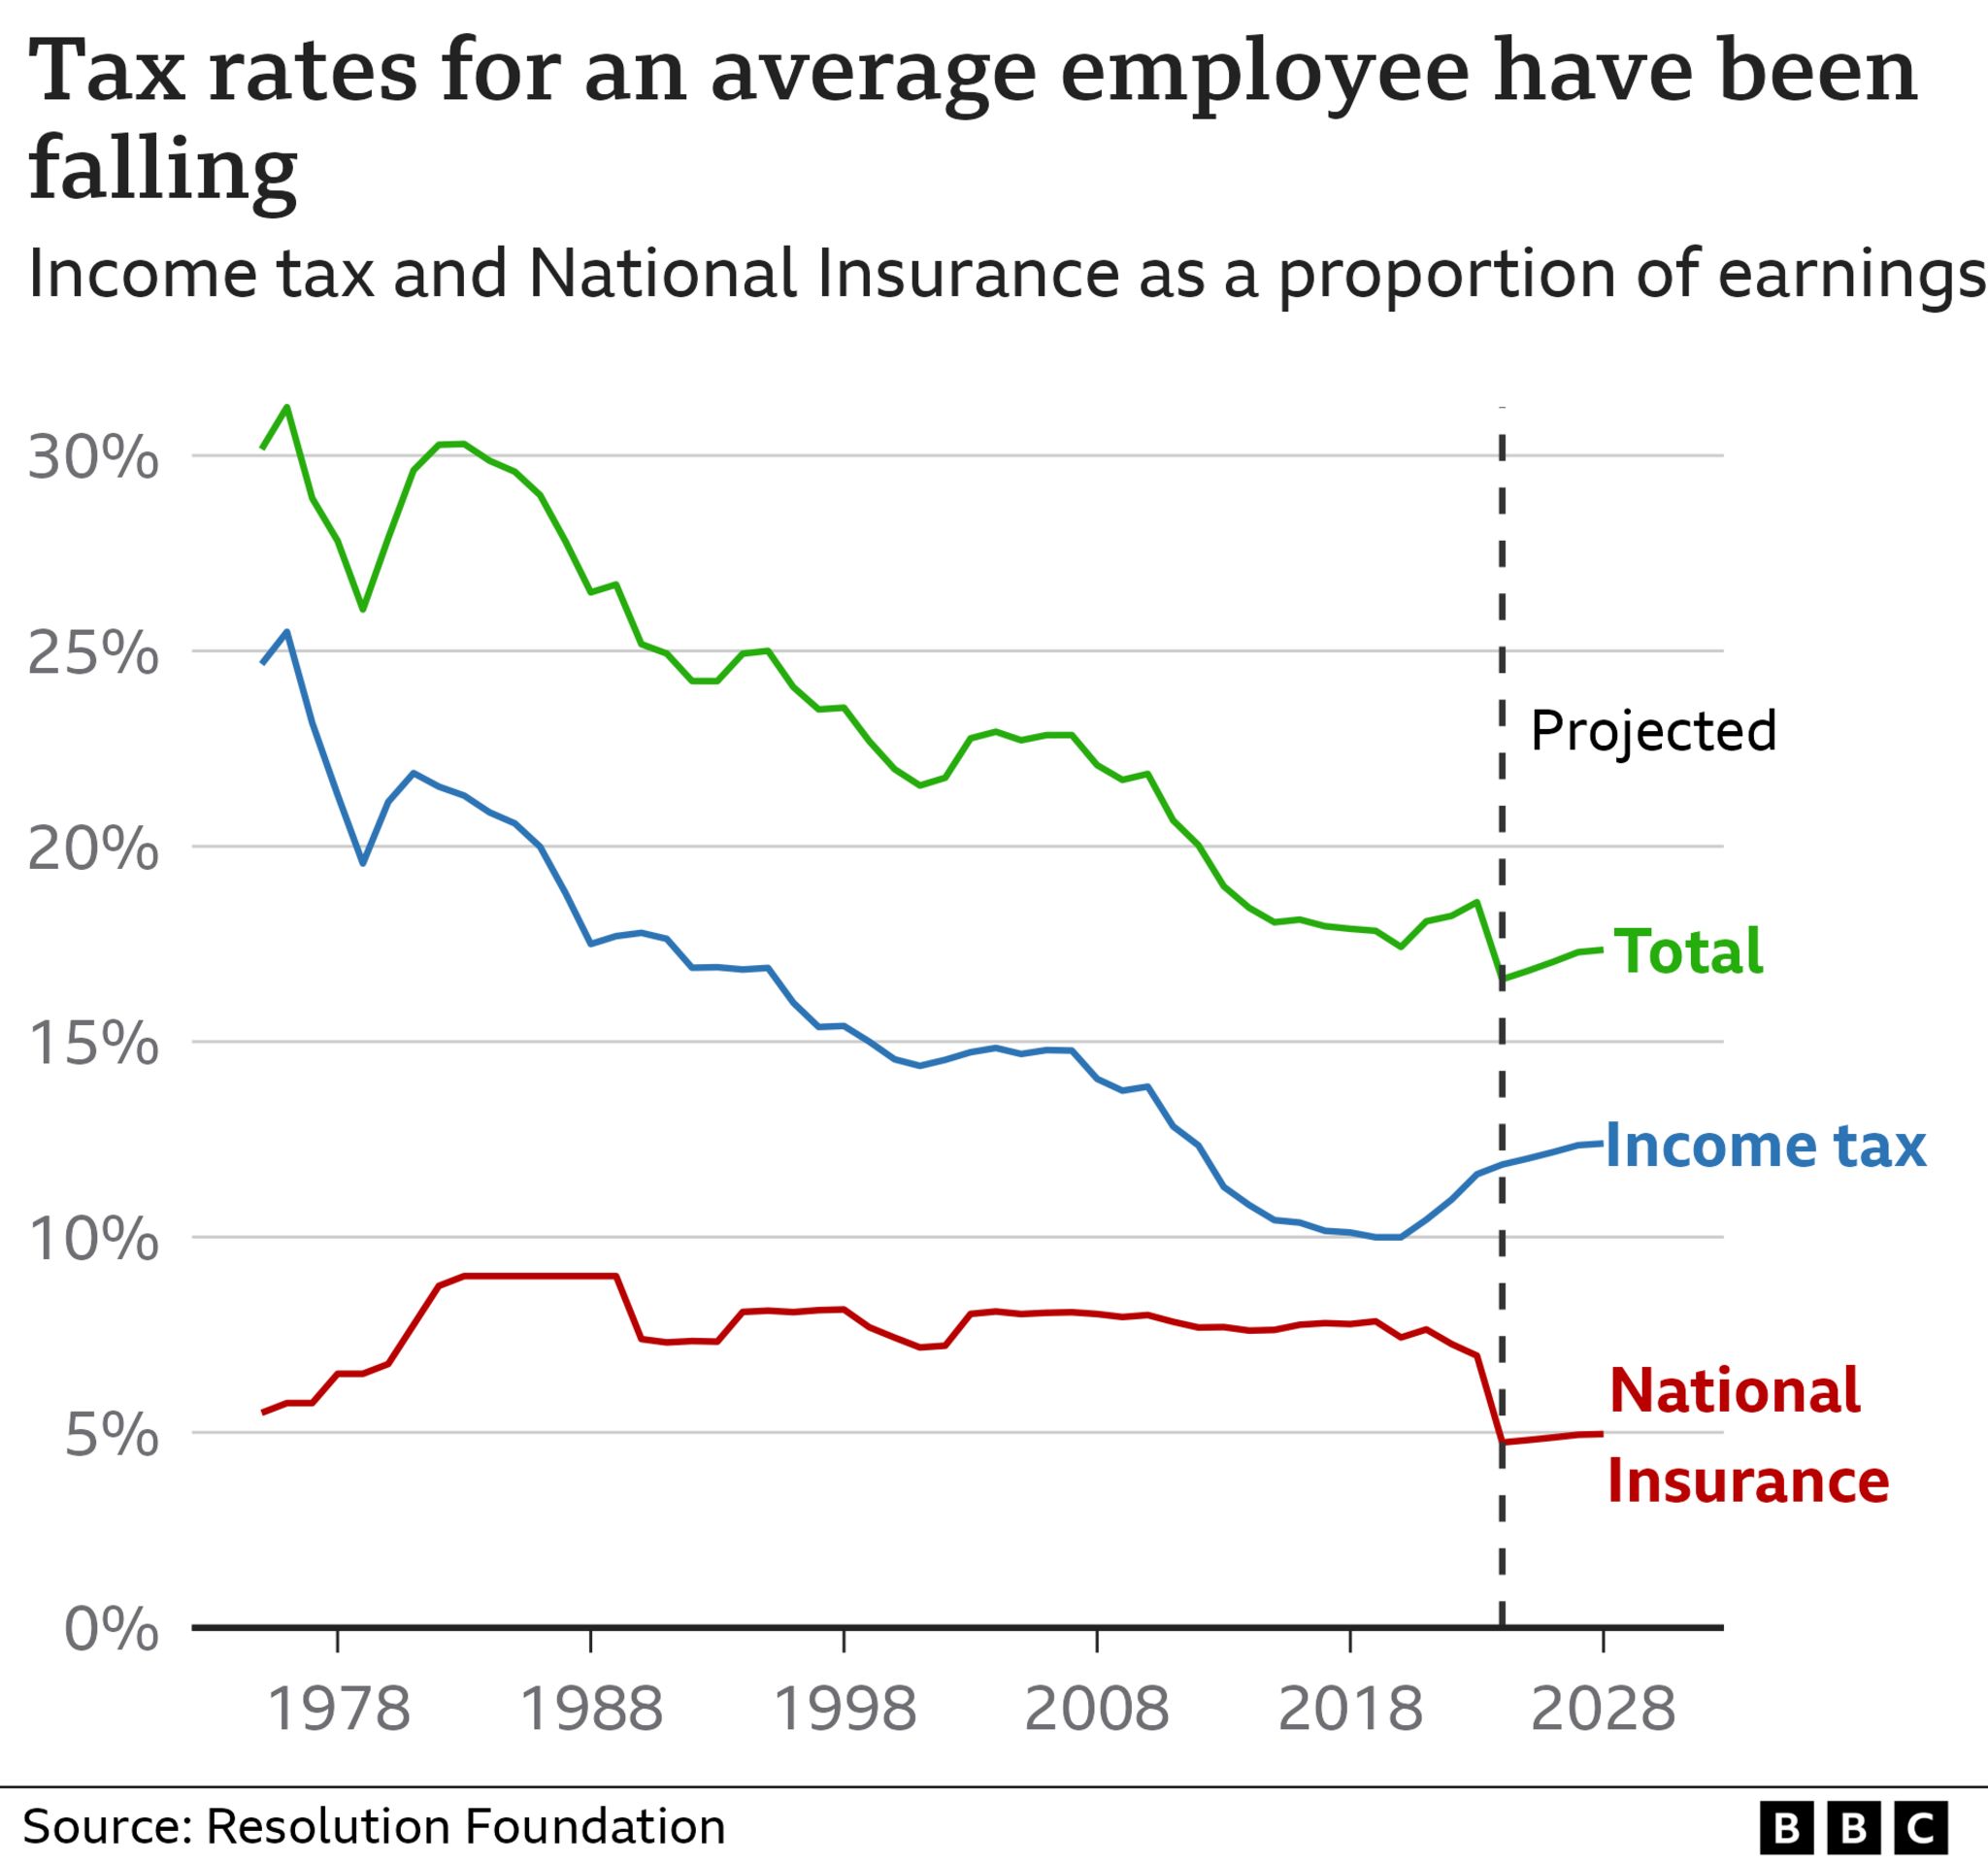 Chart showing that tax rates for an average employee have been falling but are expected to rise again in the coming years